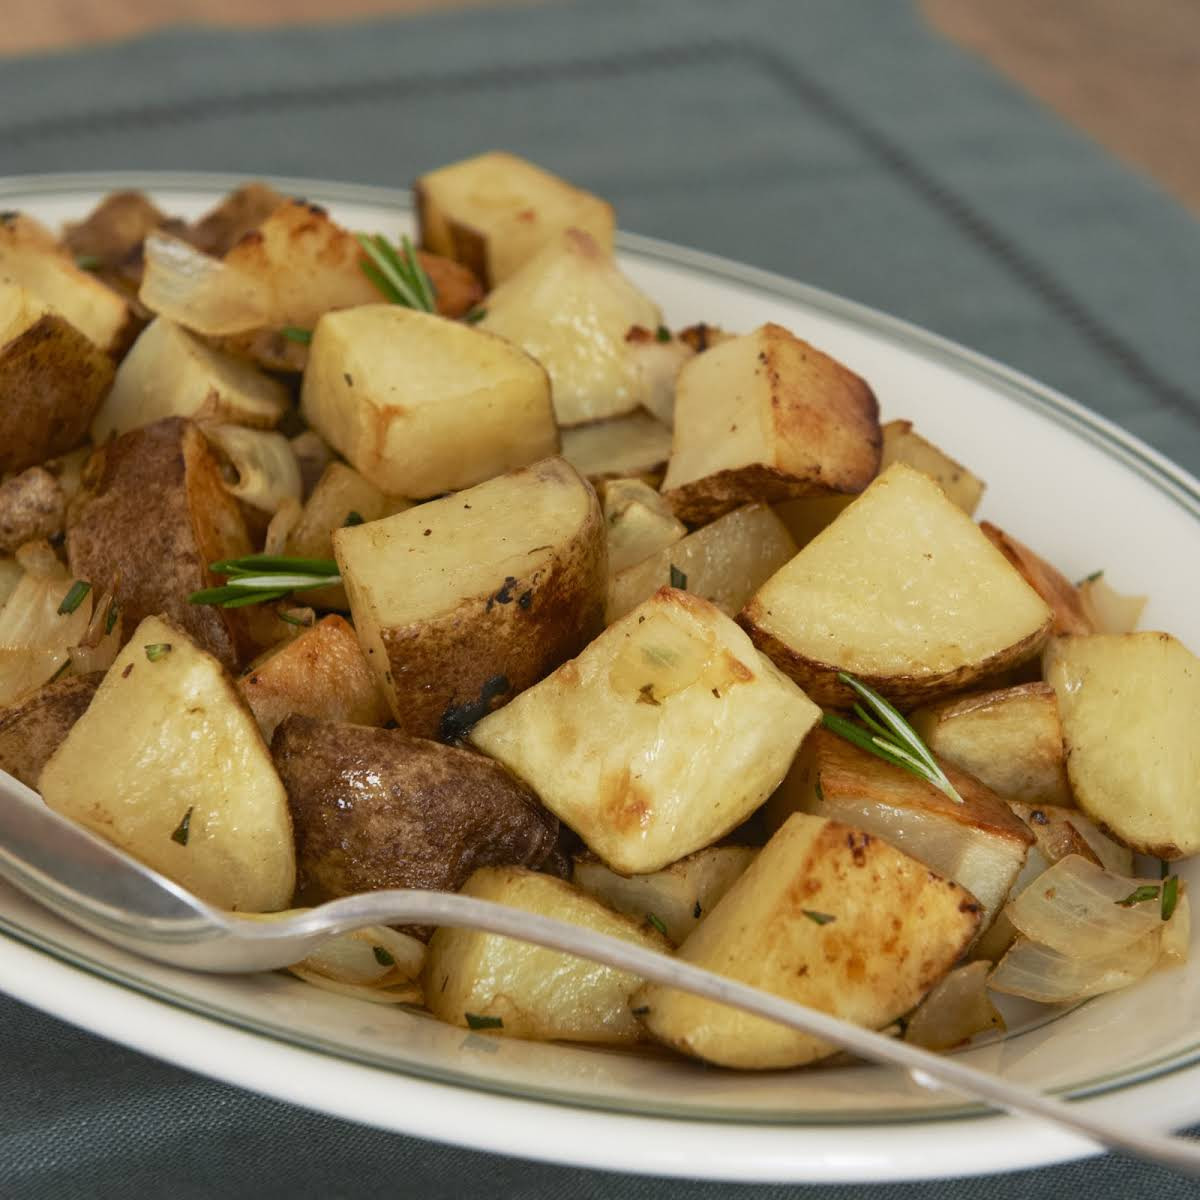 Russet Potato Side Dishes
 10 Best Baked Russet Potatoes Recipes